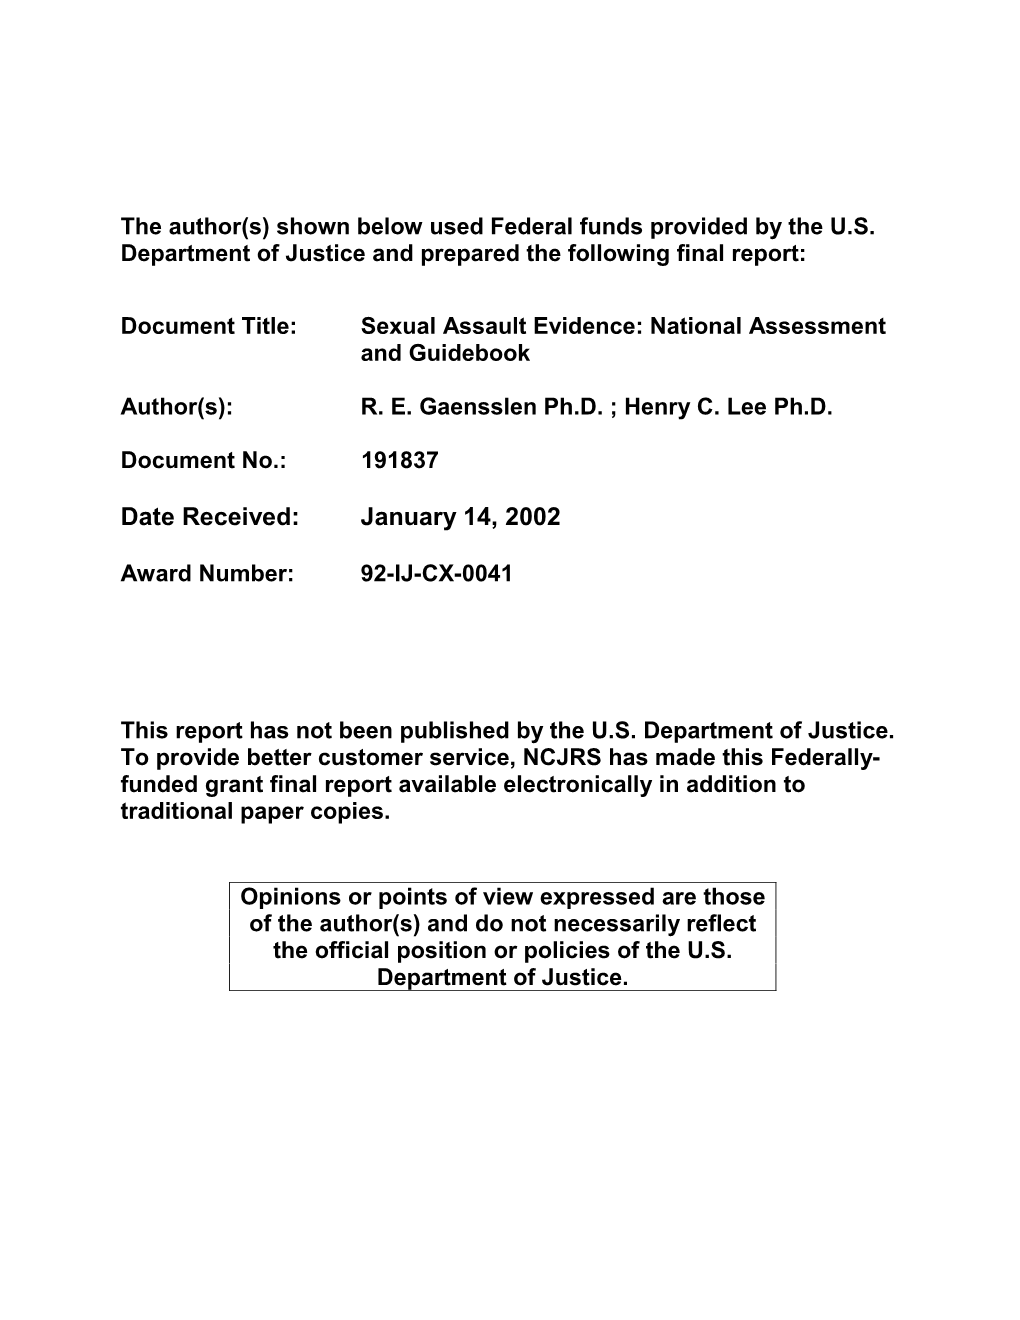 Sexual Assault Evidence: National Assessment and Guidebook